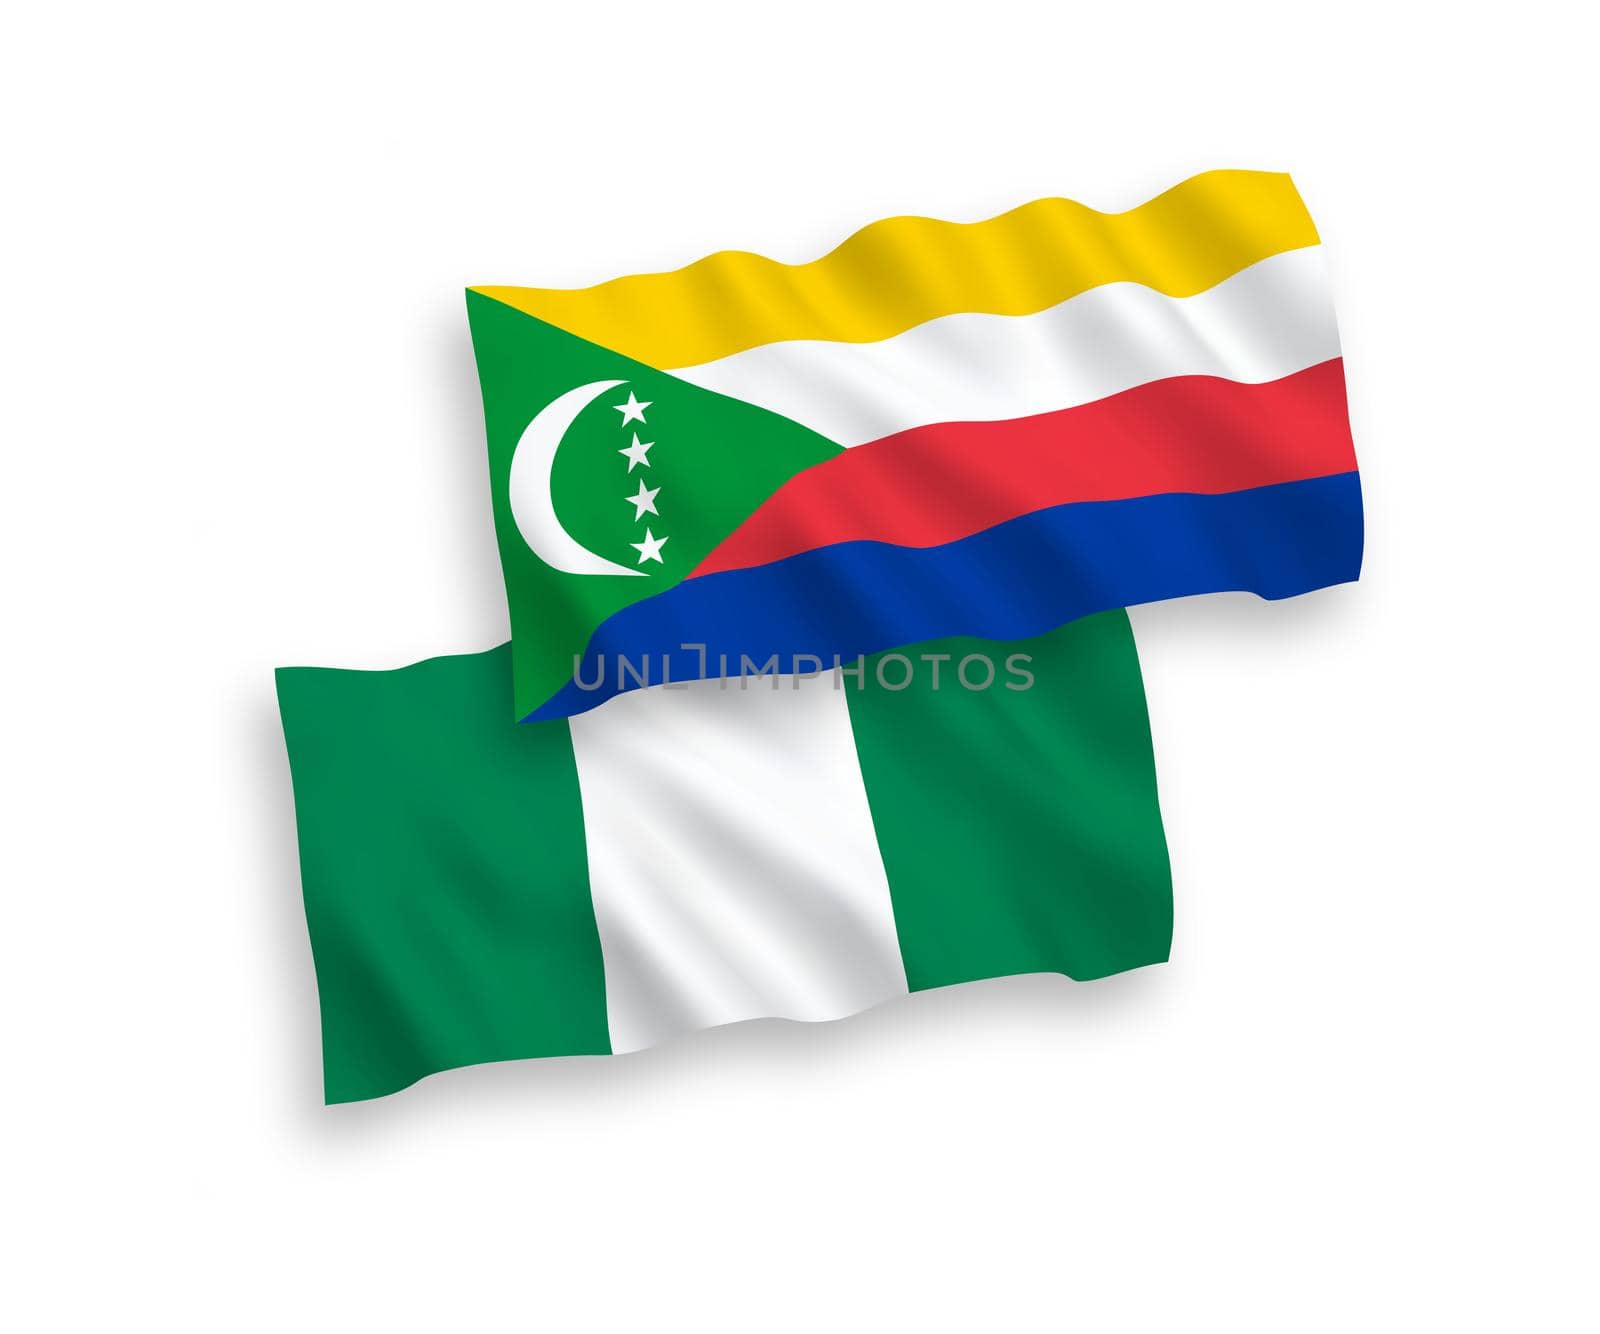 Flags of Union of the Comoros and Nigeria on a white background by epic33